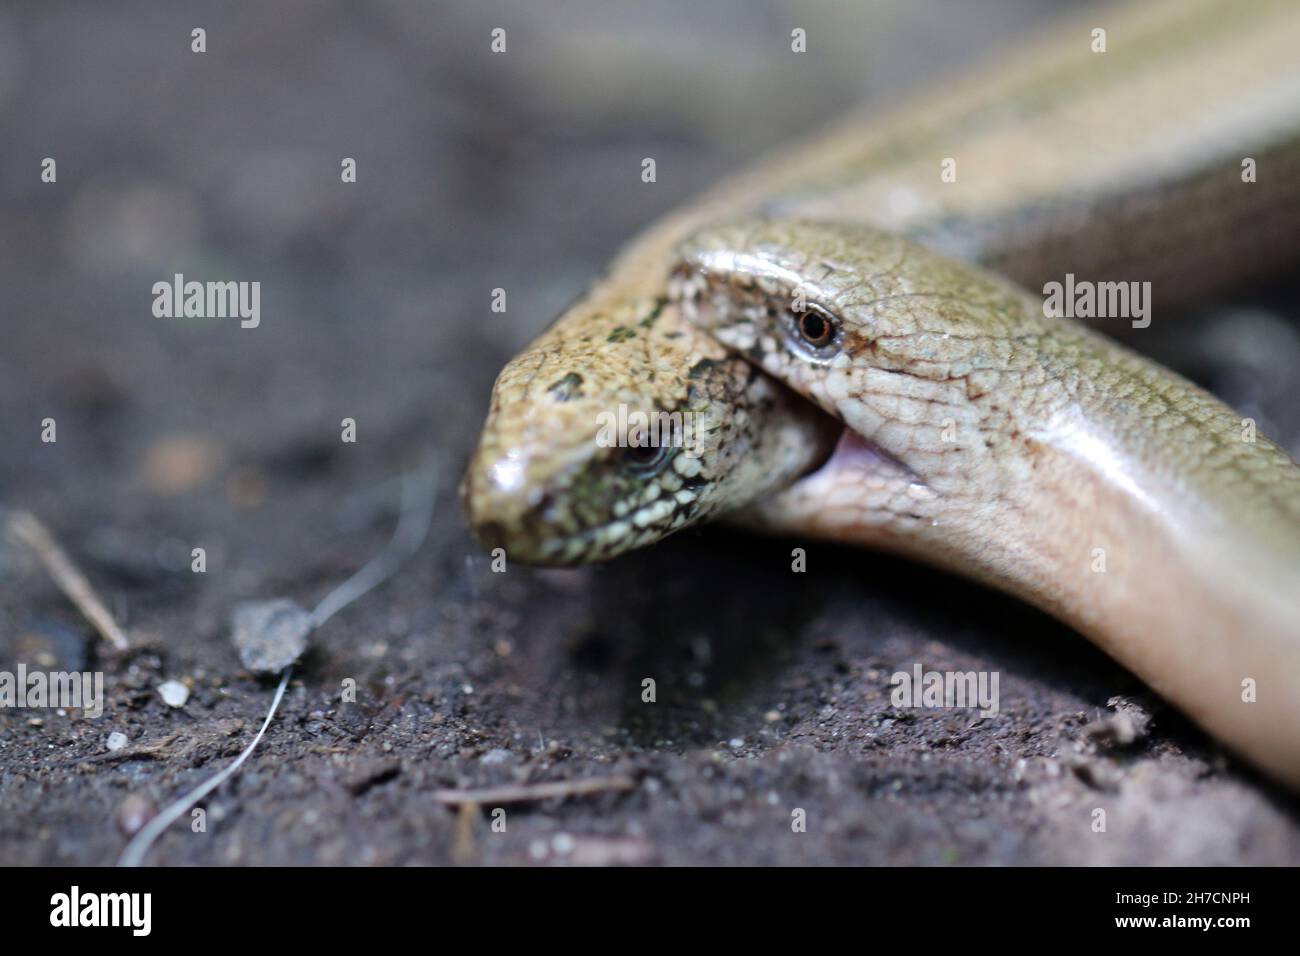 European slow worm, blindworm, slow worm (Anguis fragilis), mating bite into the head, Germany Stock Photo